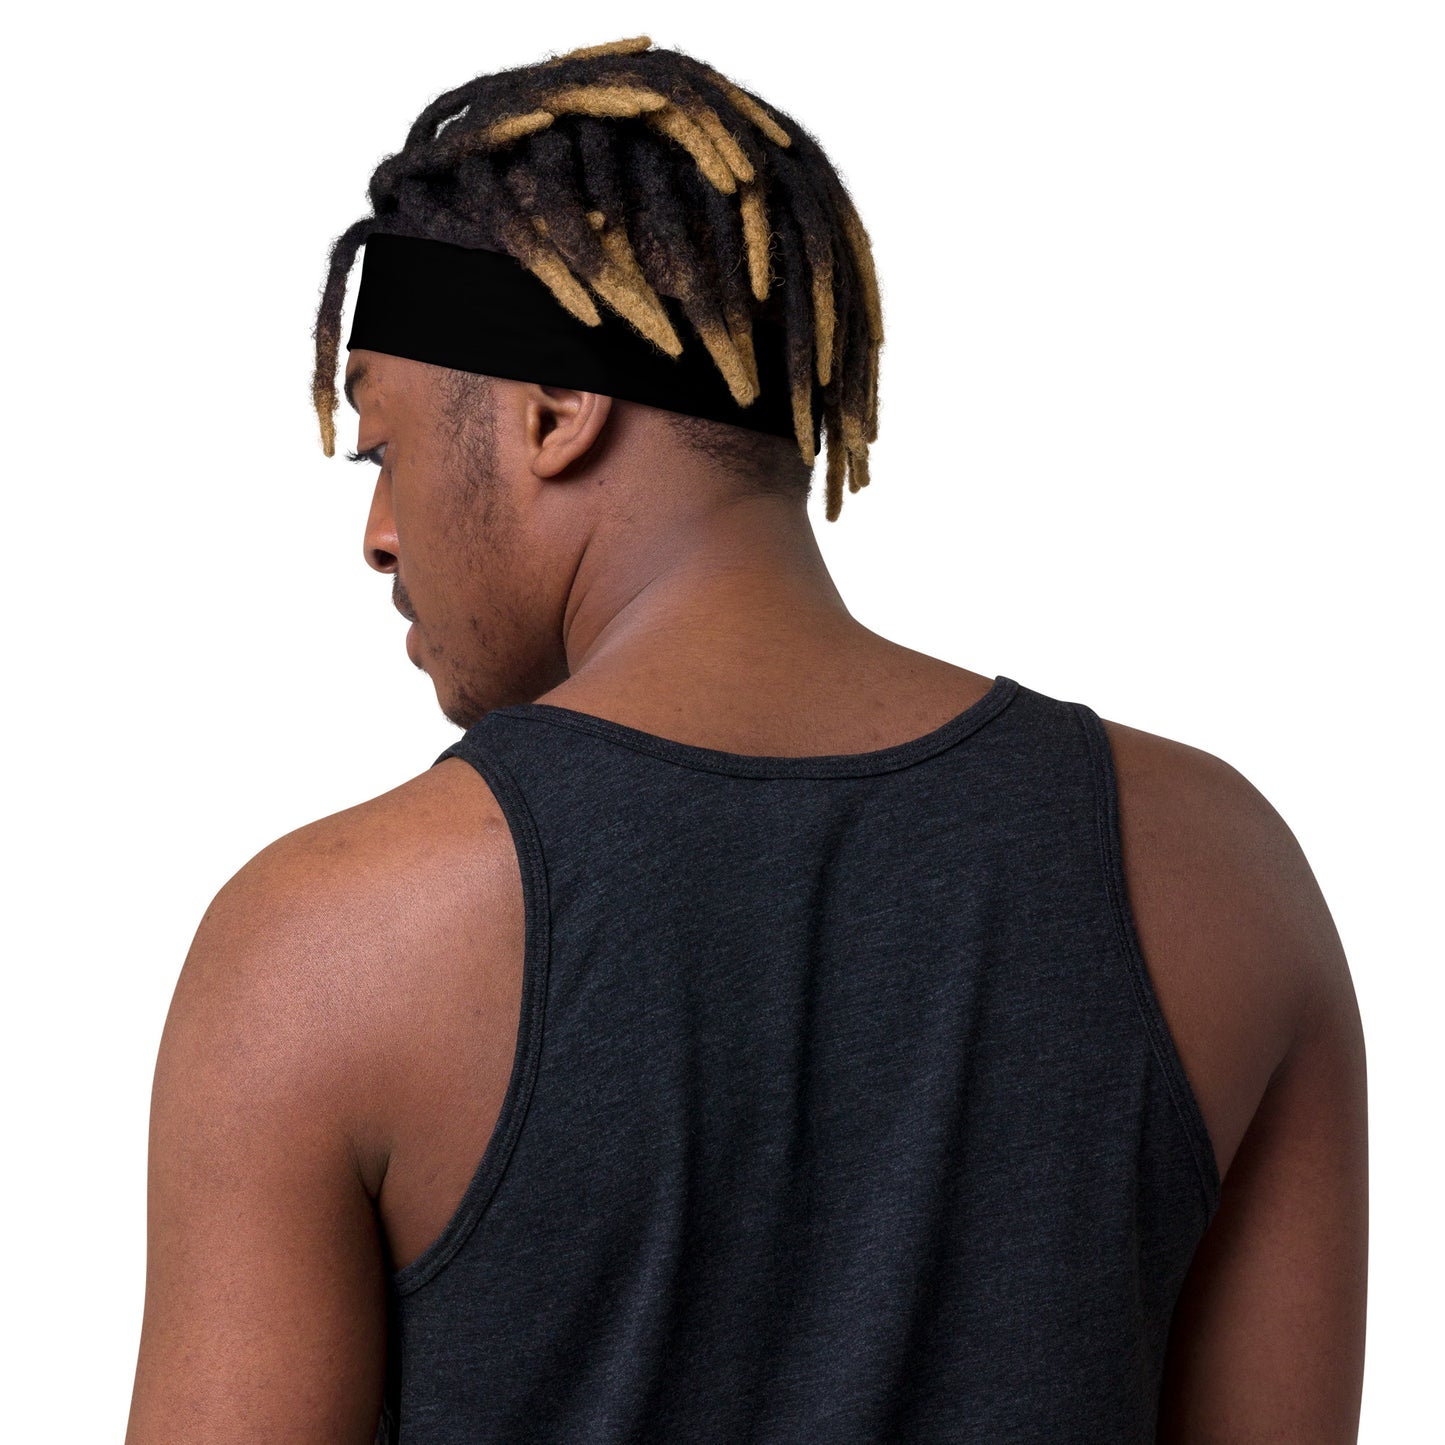 Club Amber Basketball Kilkenny Headband - Designed by Moon Behind The Hill Available to Buy at a Discounted Price on Moon Behind The Hill Online Designer Discount Store